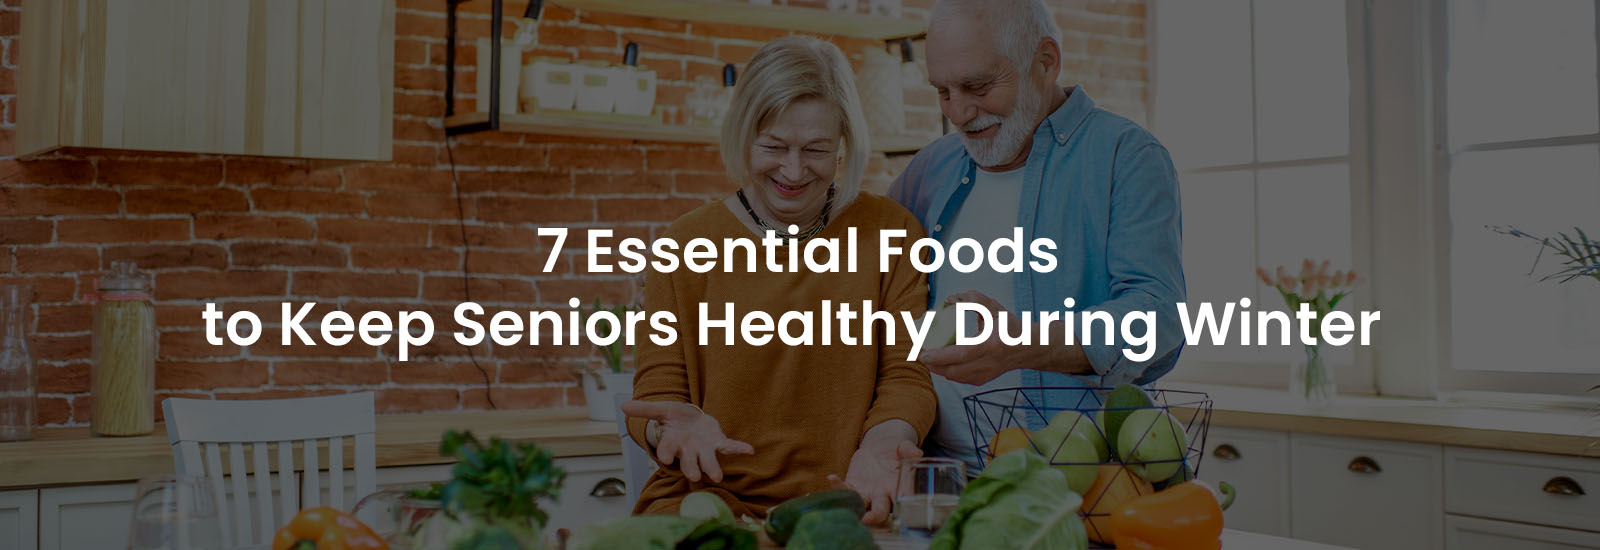 7 Essential Foods to Keep Seniors Healthy During Winter | Banner Image